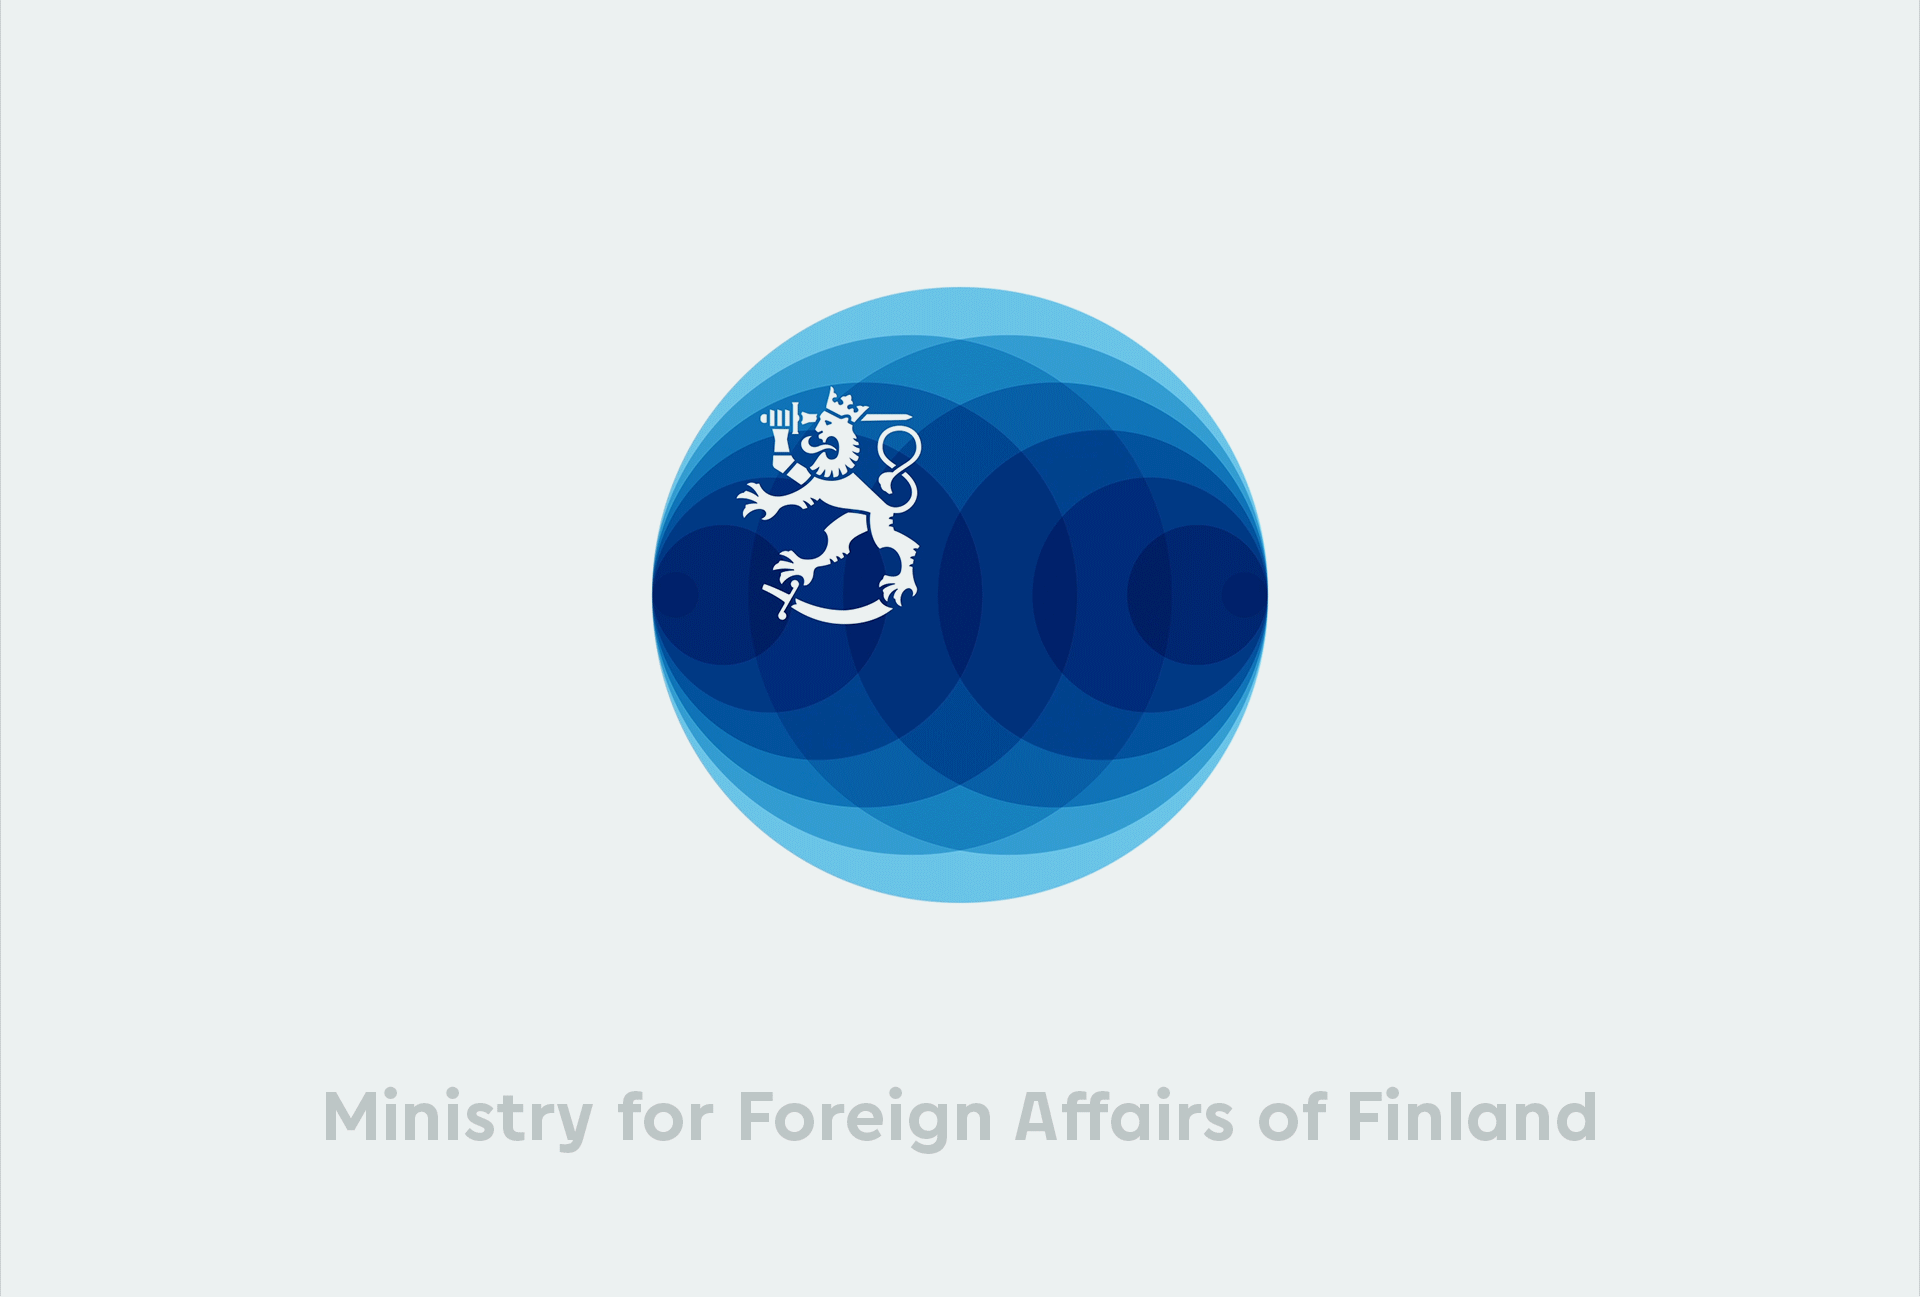 New Logo and Identity for Ministry for Foreign Affairs of Finland by 358